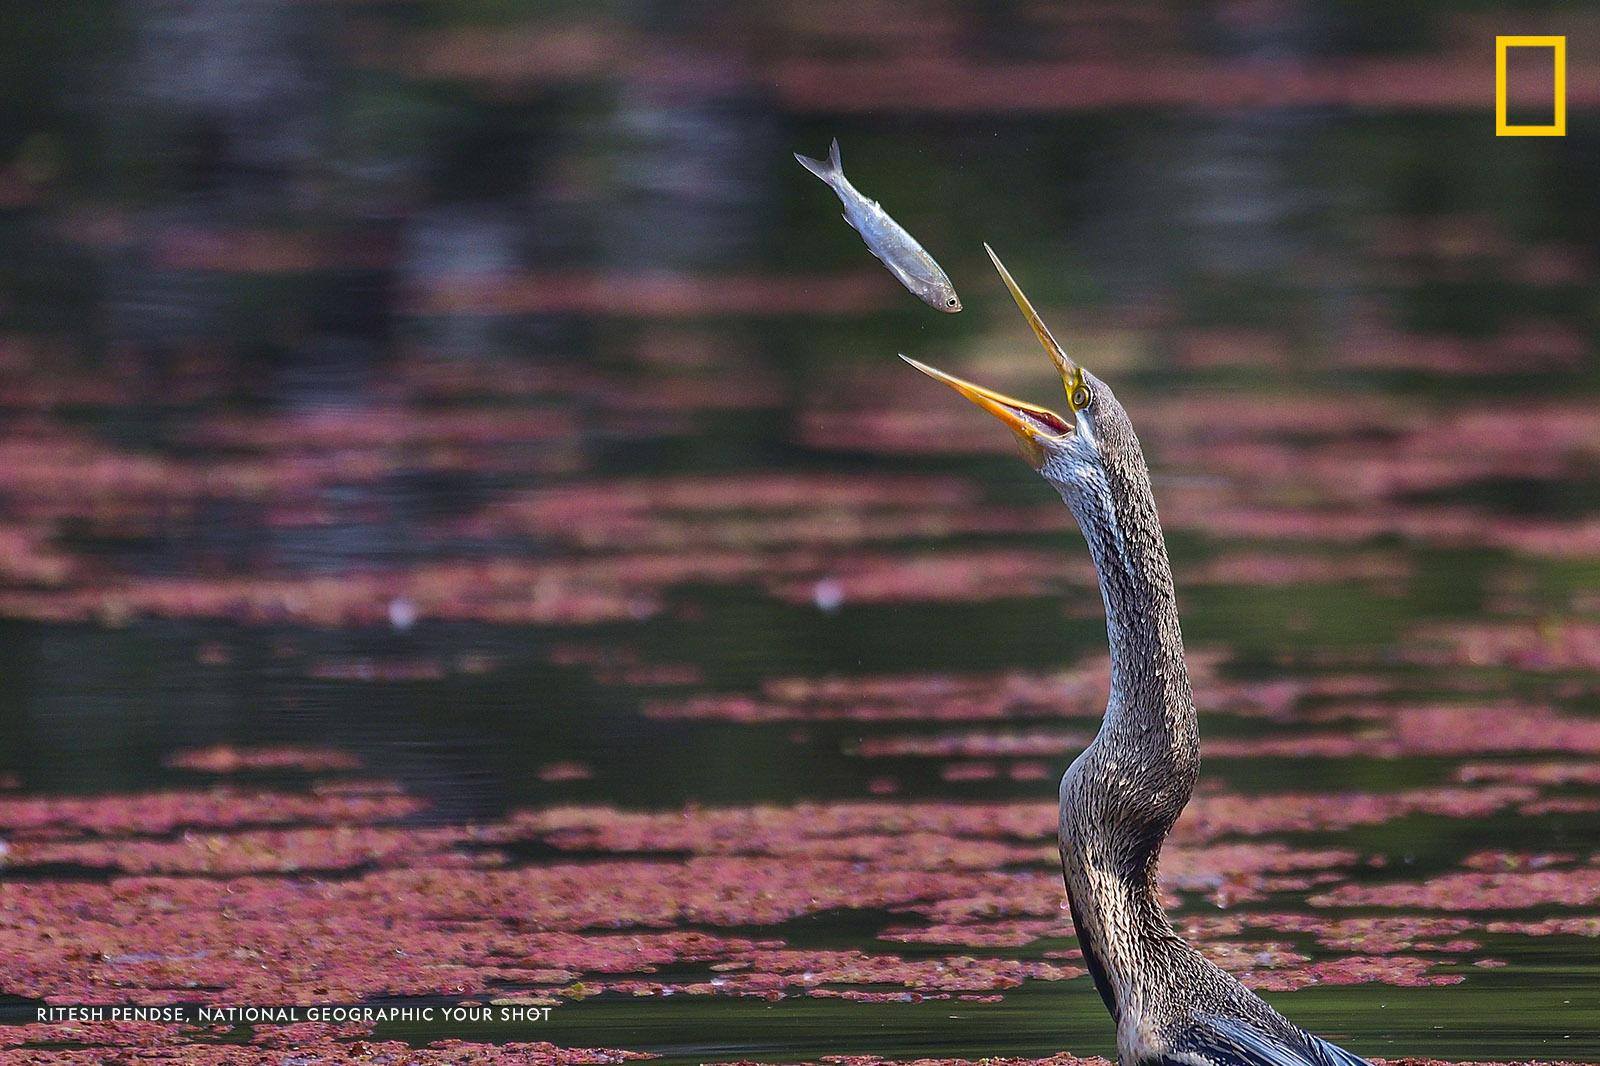 Help us caption this image by Your Shot photographer Ritesh Pendse: https://on.natgeo.com/2liWcy6